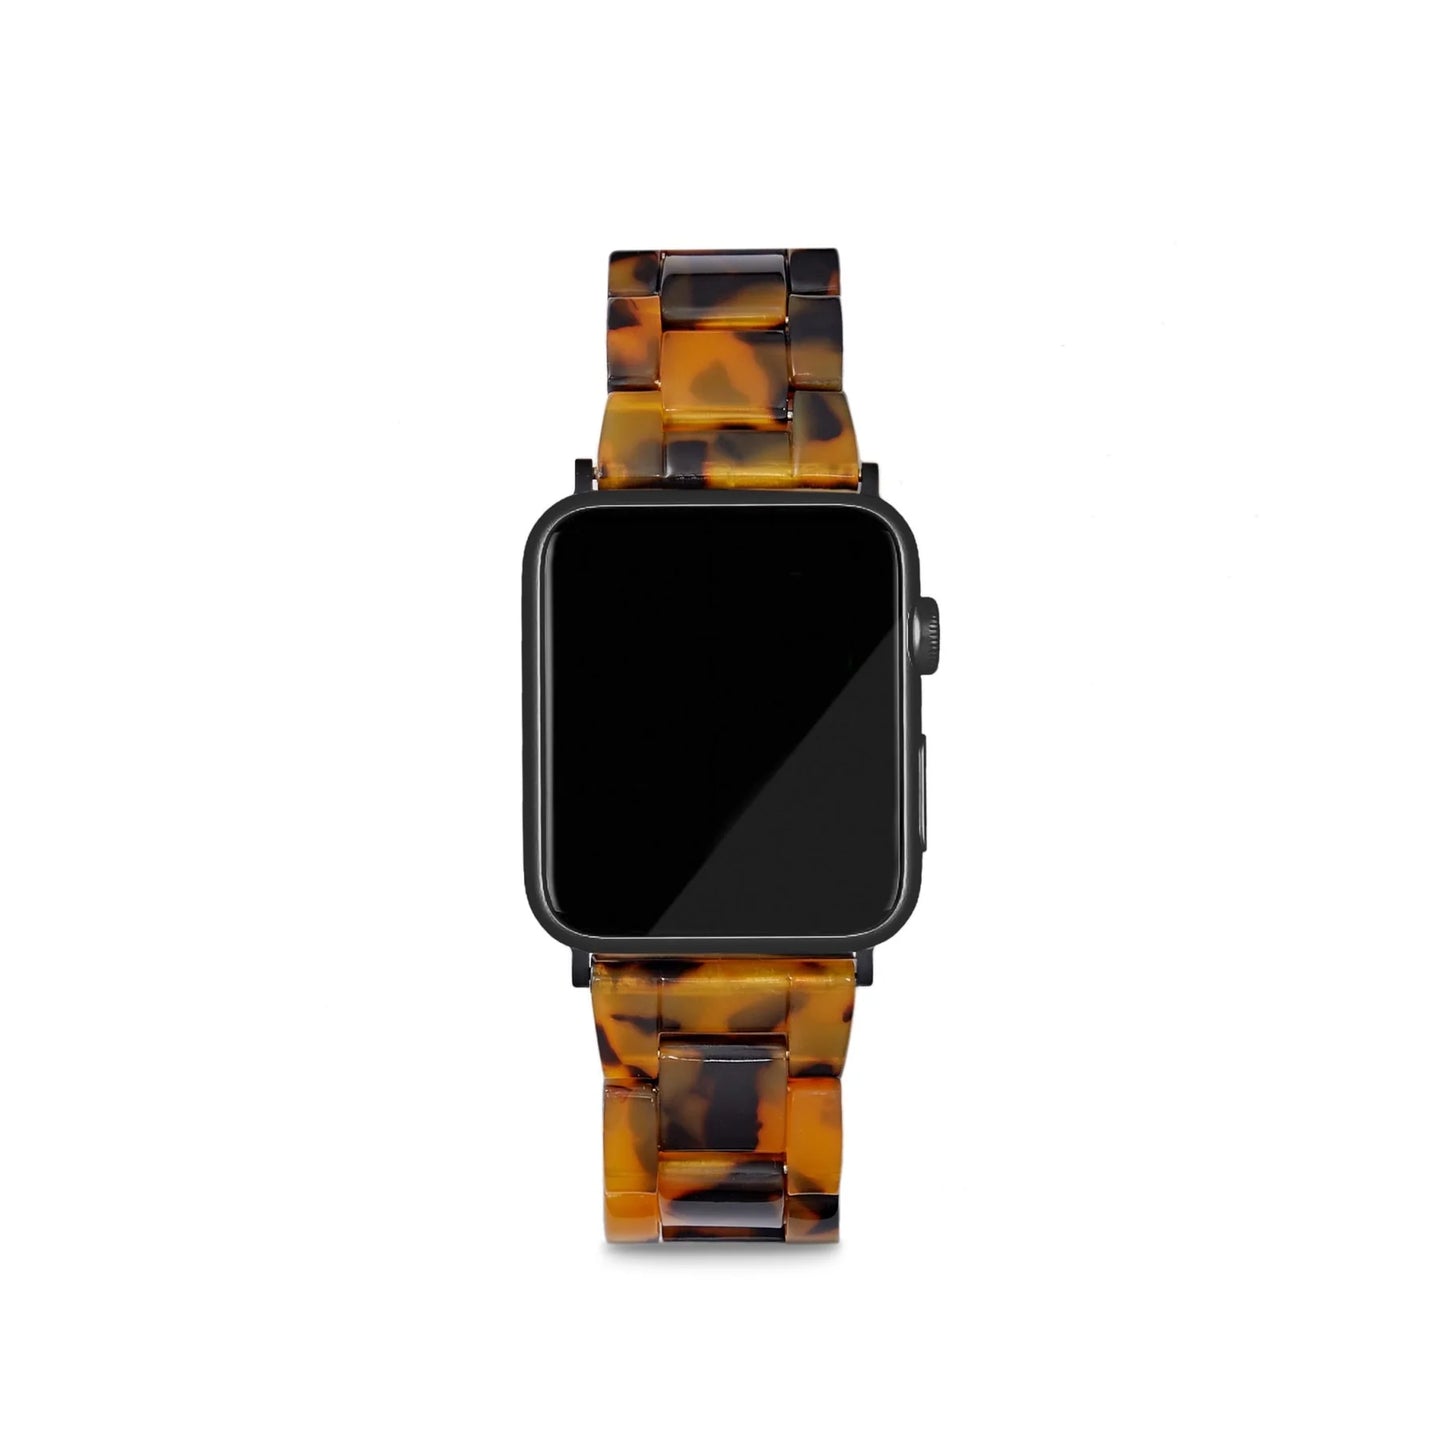 Apple Watch Band in Classic Tortoise